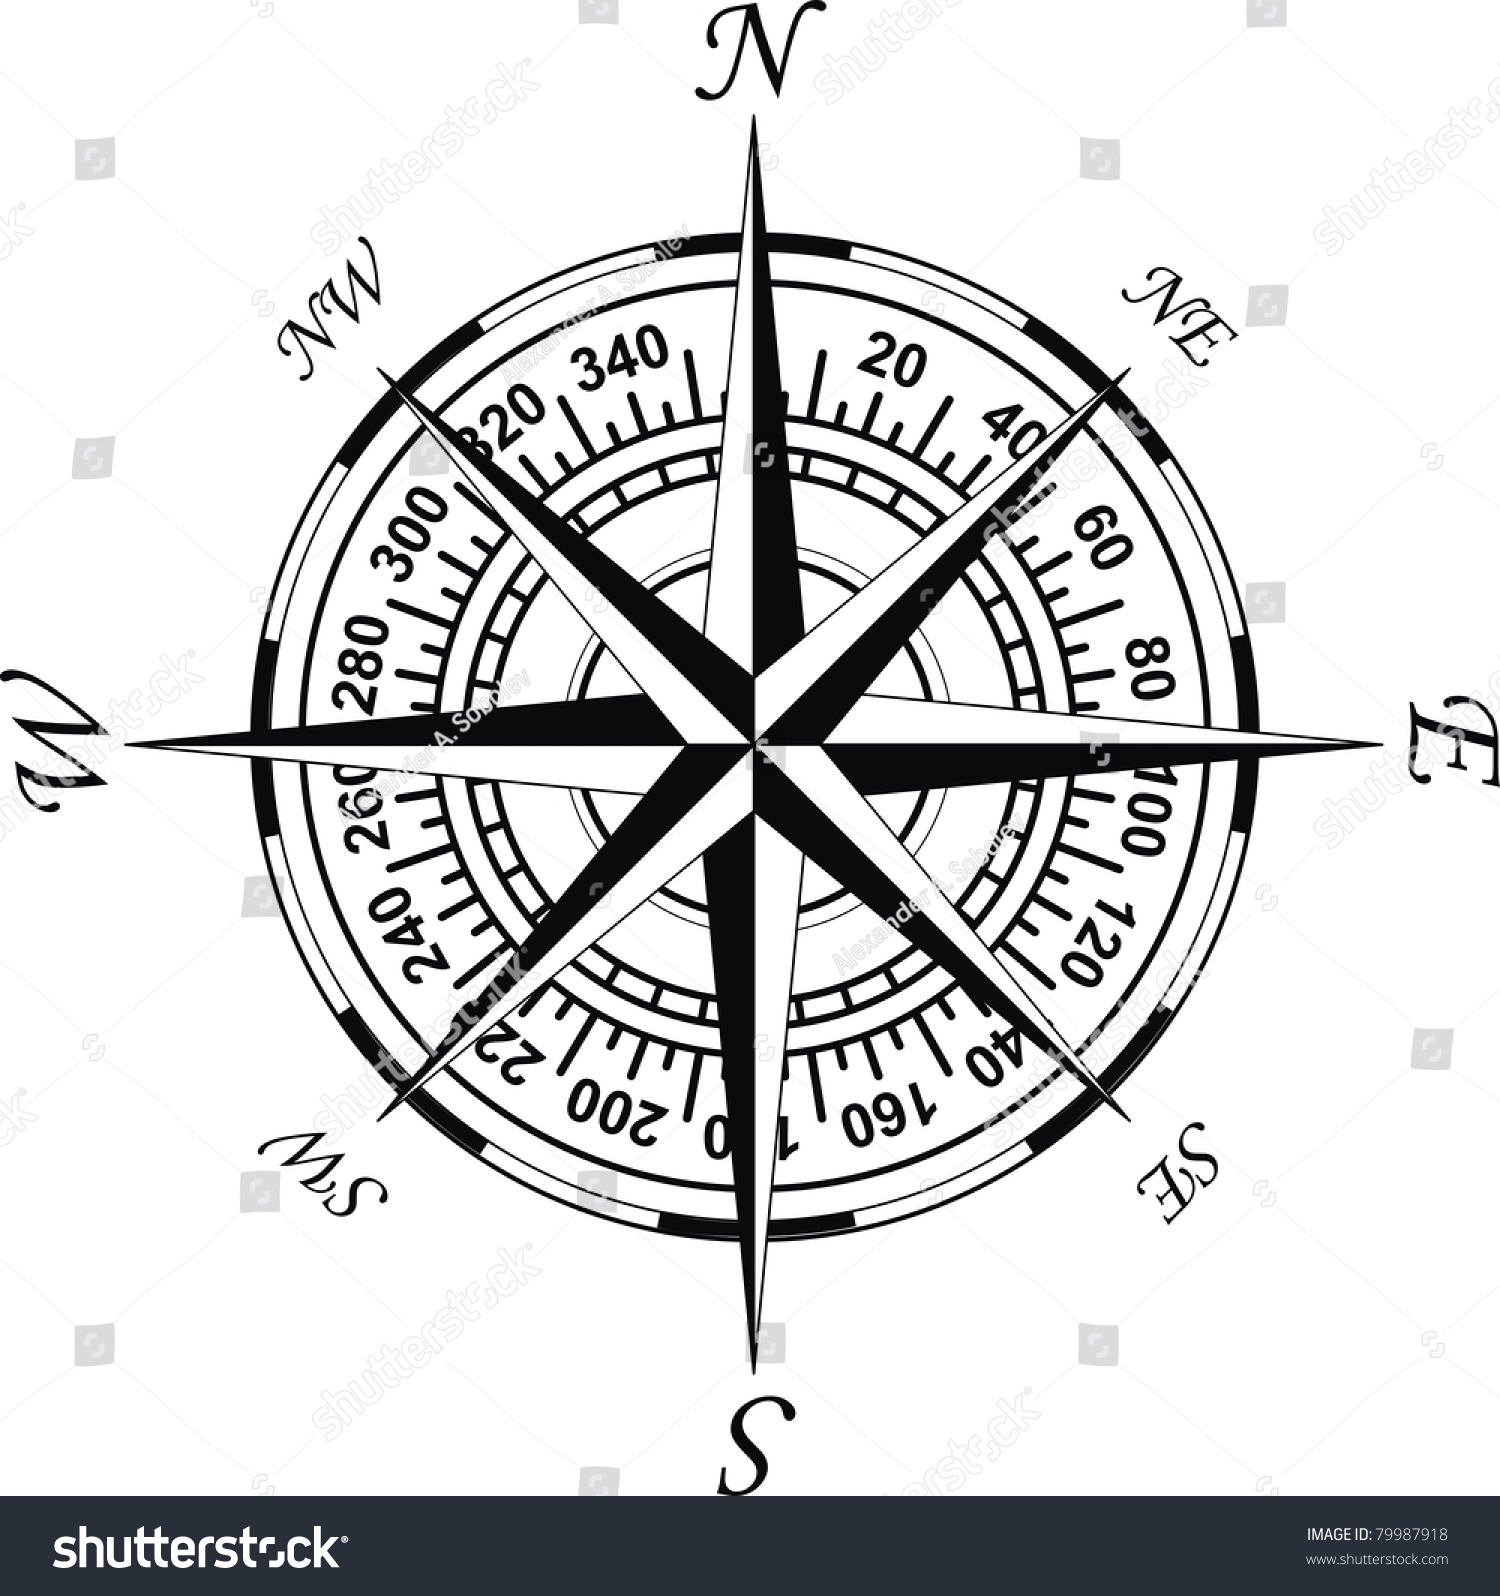 clipart wind rose - photo #15